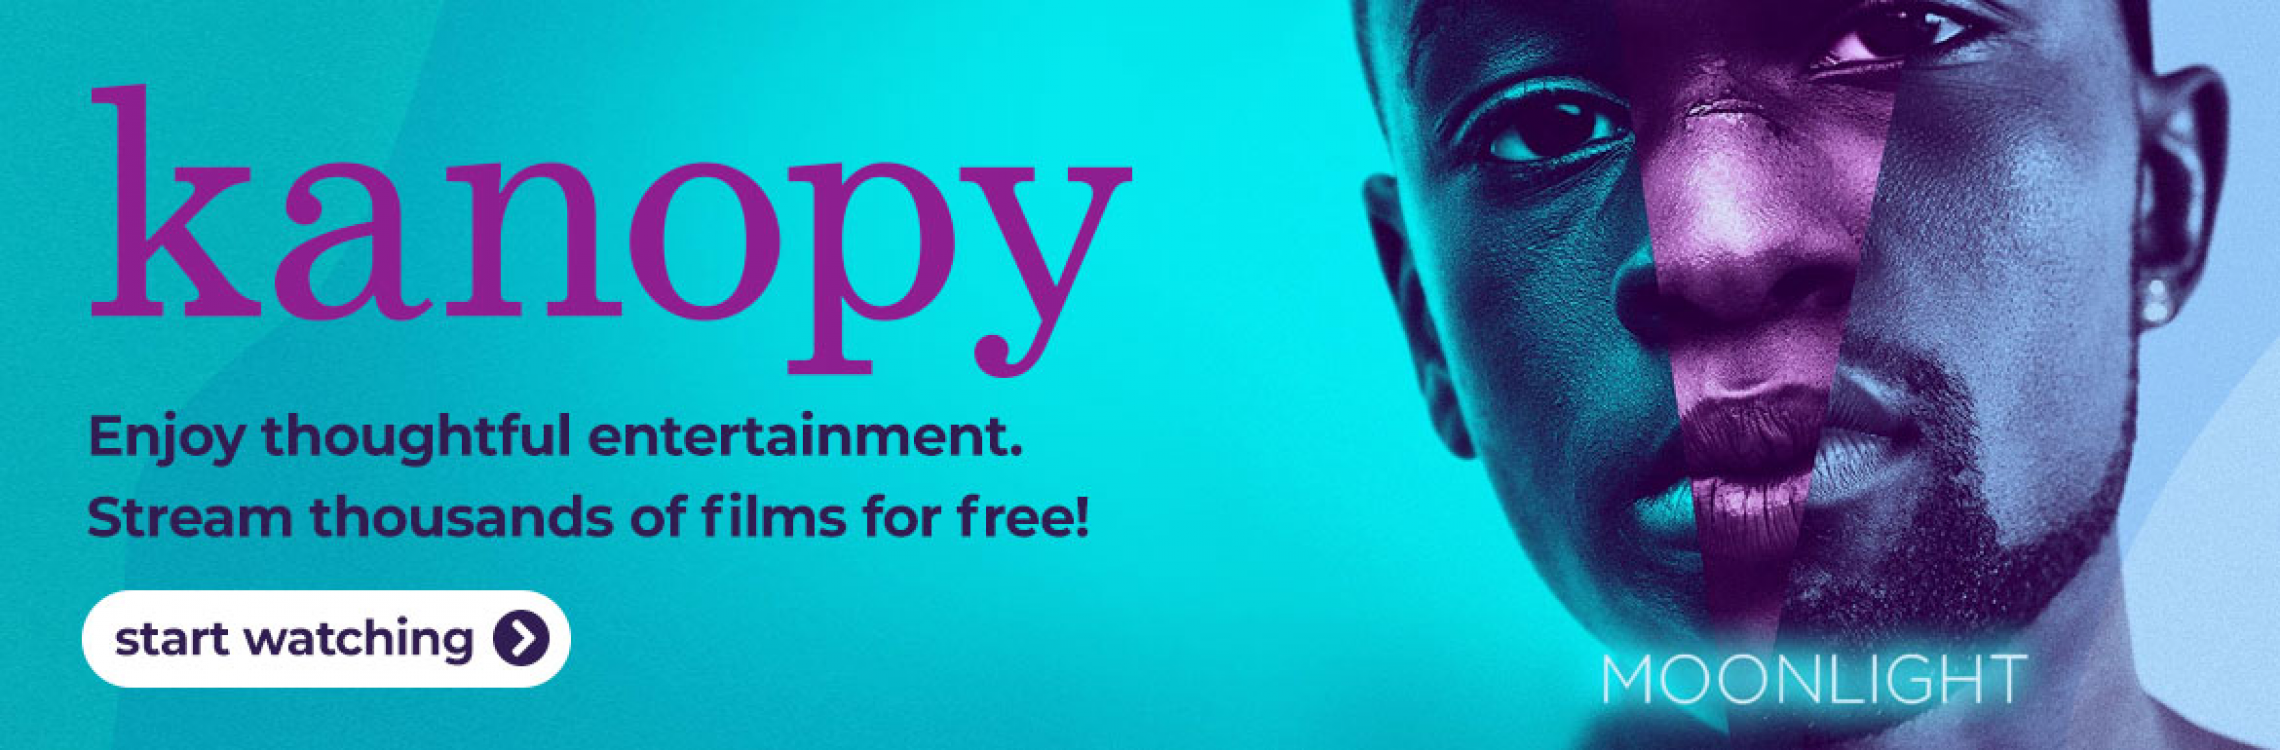 Kanopy slide with graphic from the film "Moonlight" with text that reads, "Kanopy: Enjoy thoughtful entertainment. Stream thousands of films for free! start watching